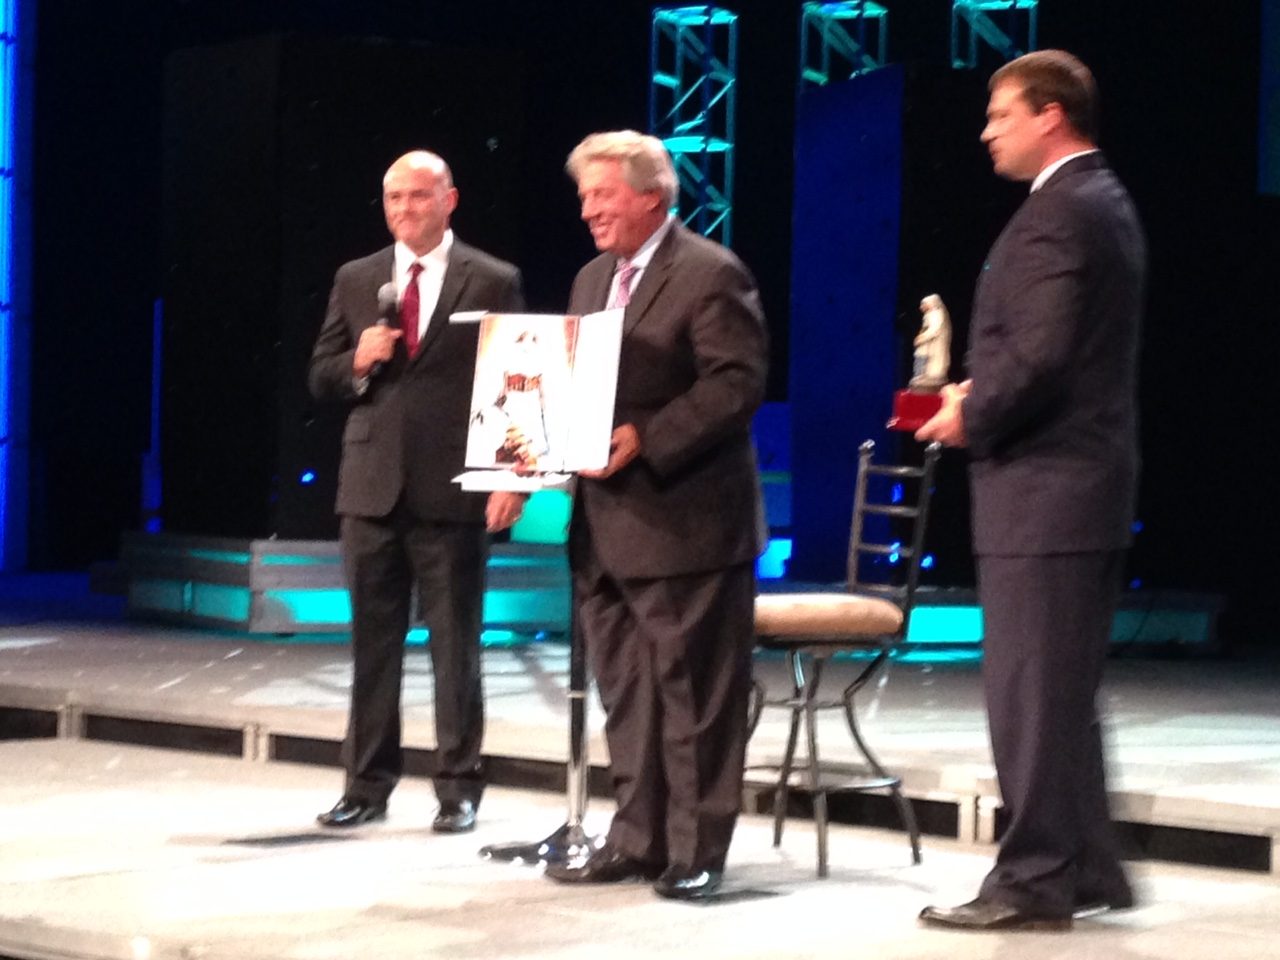 John Maxwell receives the Mother Teresa Prize for Global Peace and Leadership at Lead Through Change in Asheville, NC